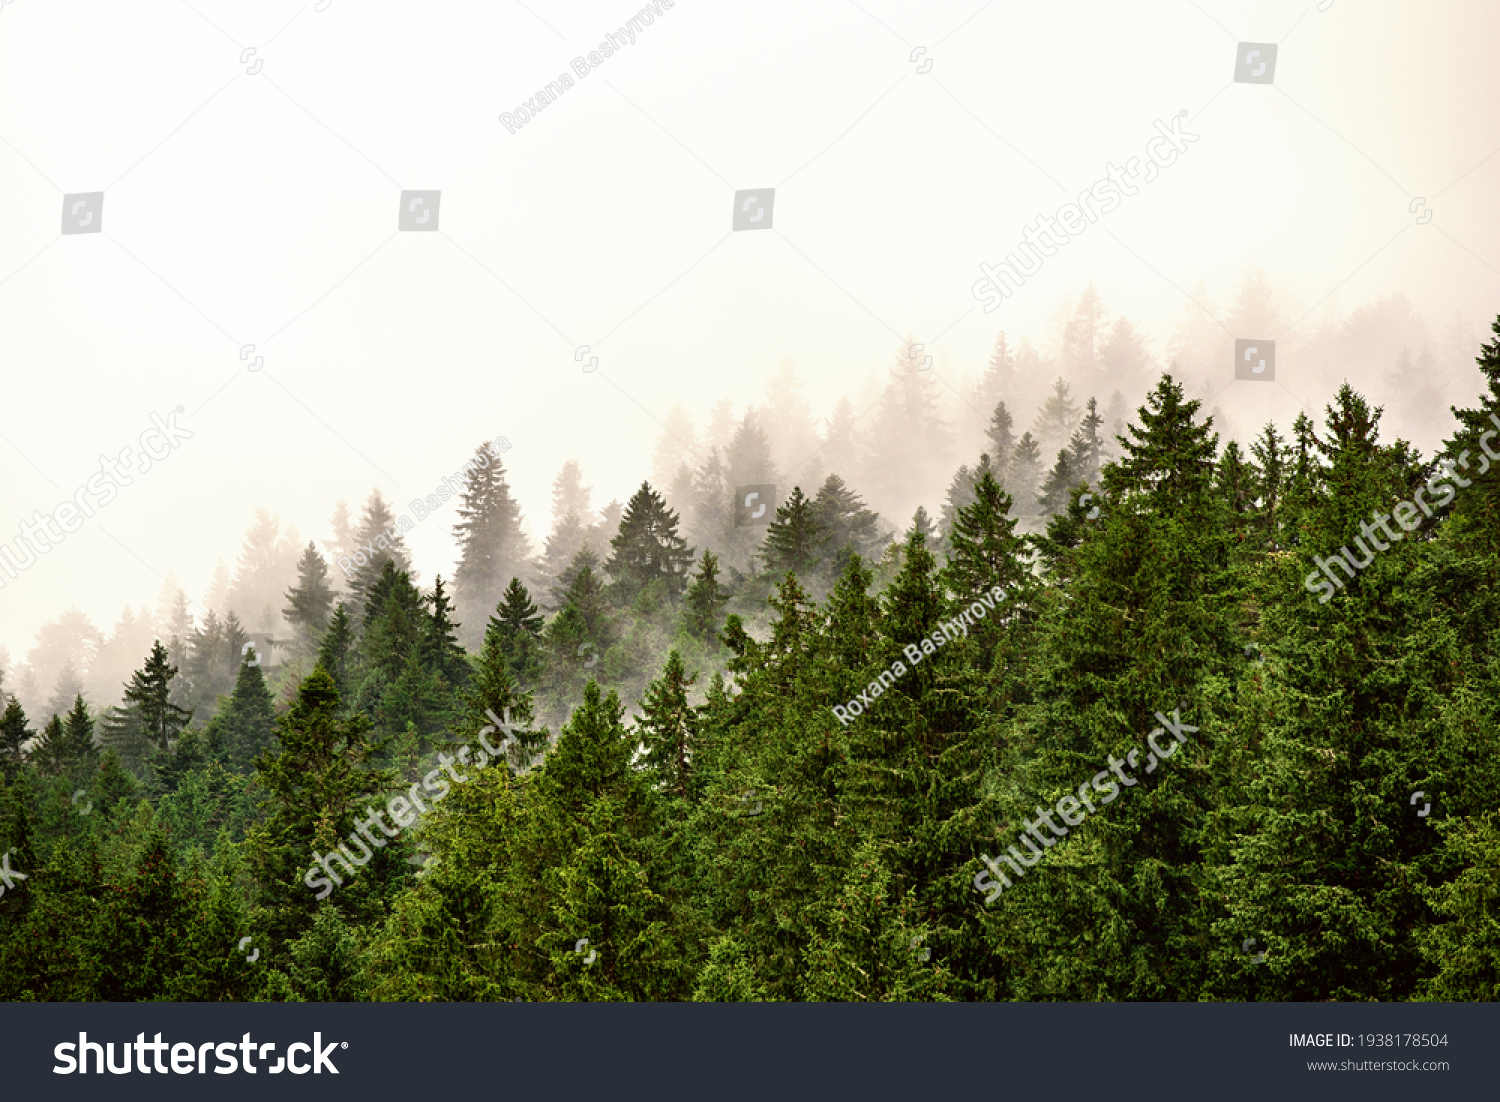 Misty foggy mountain landscape with fir forest and copyspace in vintage retro hipster style #1938178504